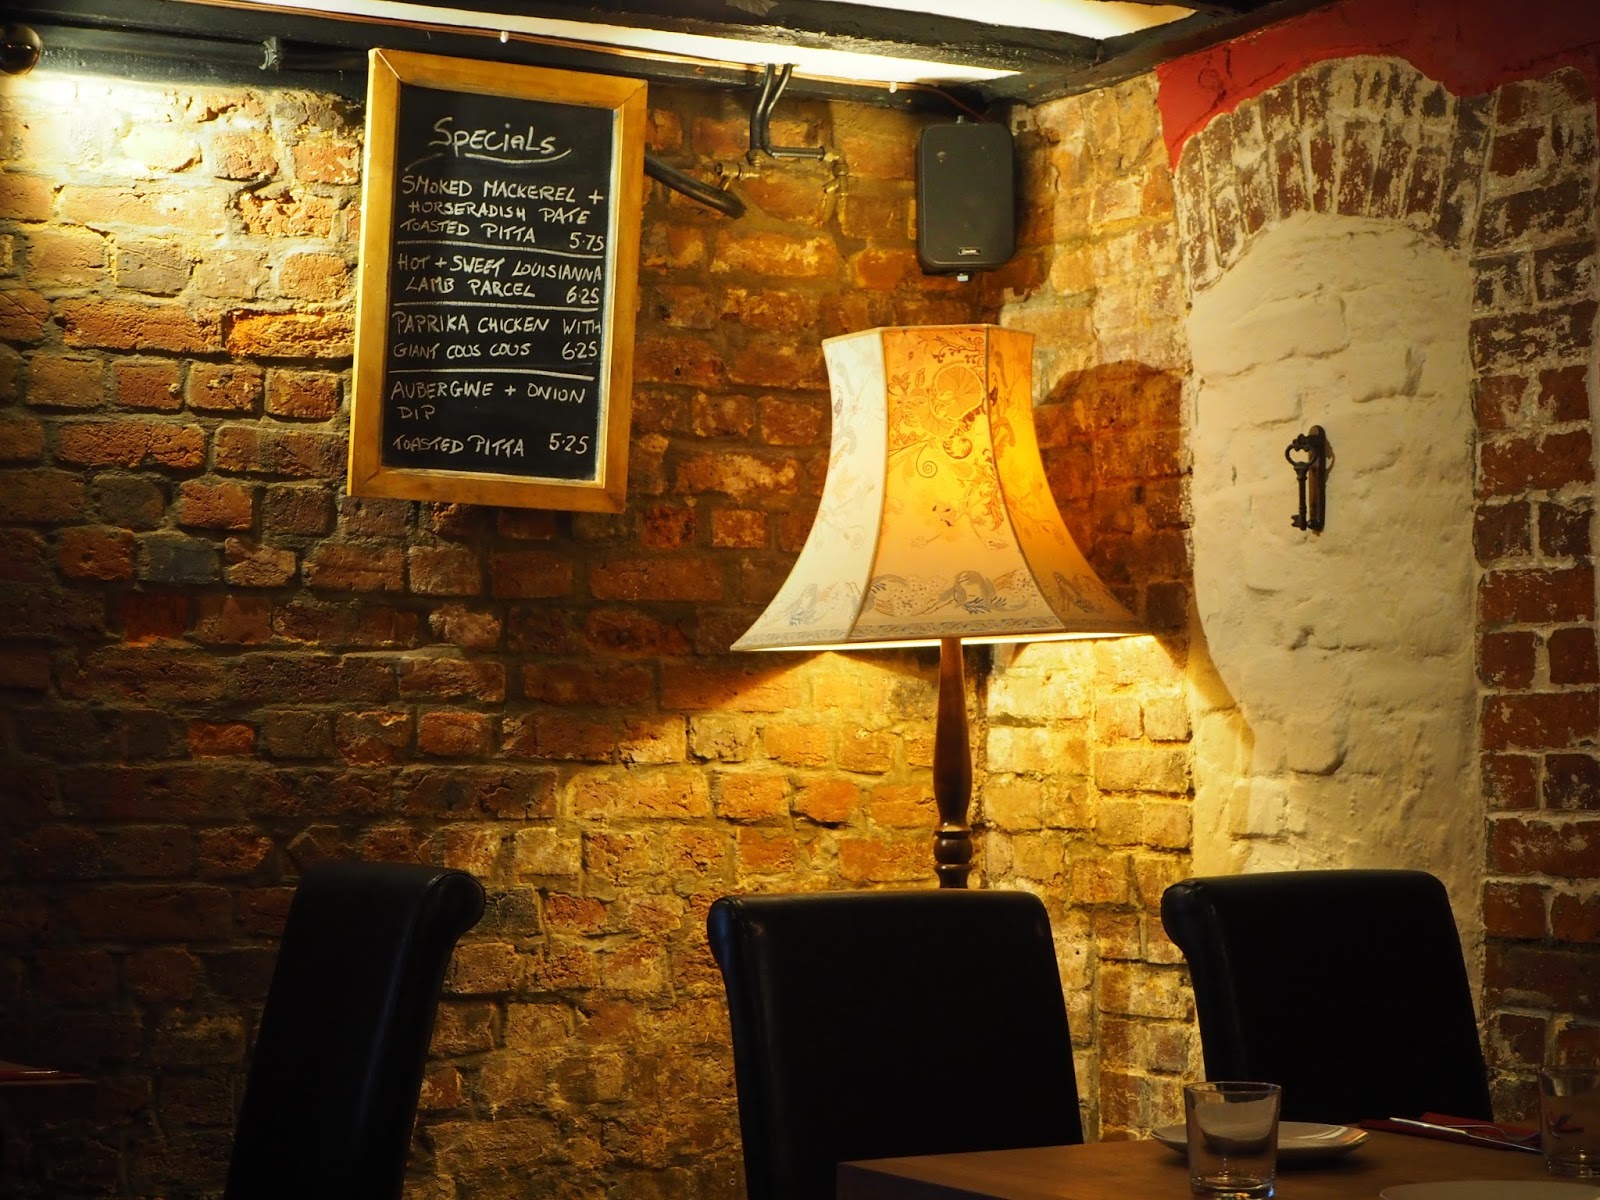 Restaurant review of Number 23 (British Tapas) in St Albans, UK